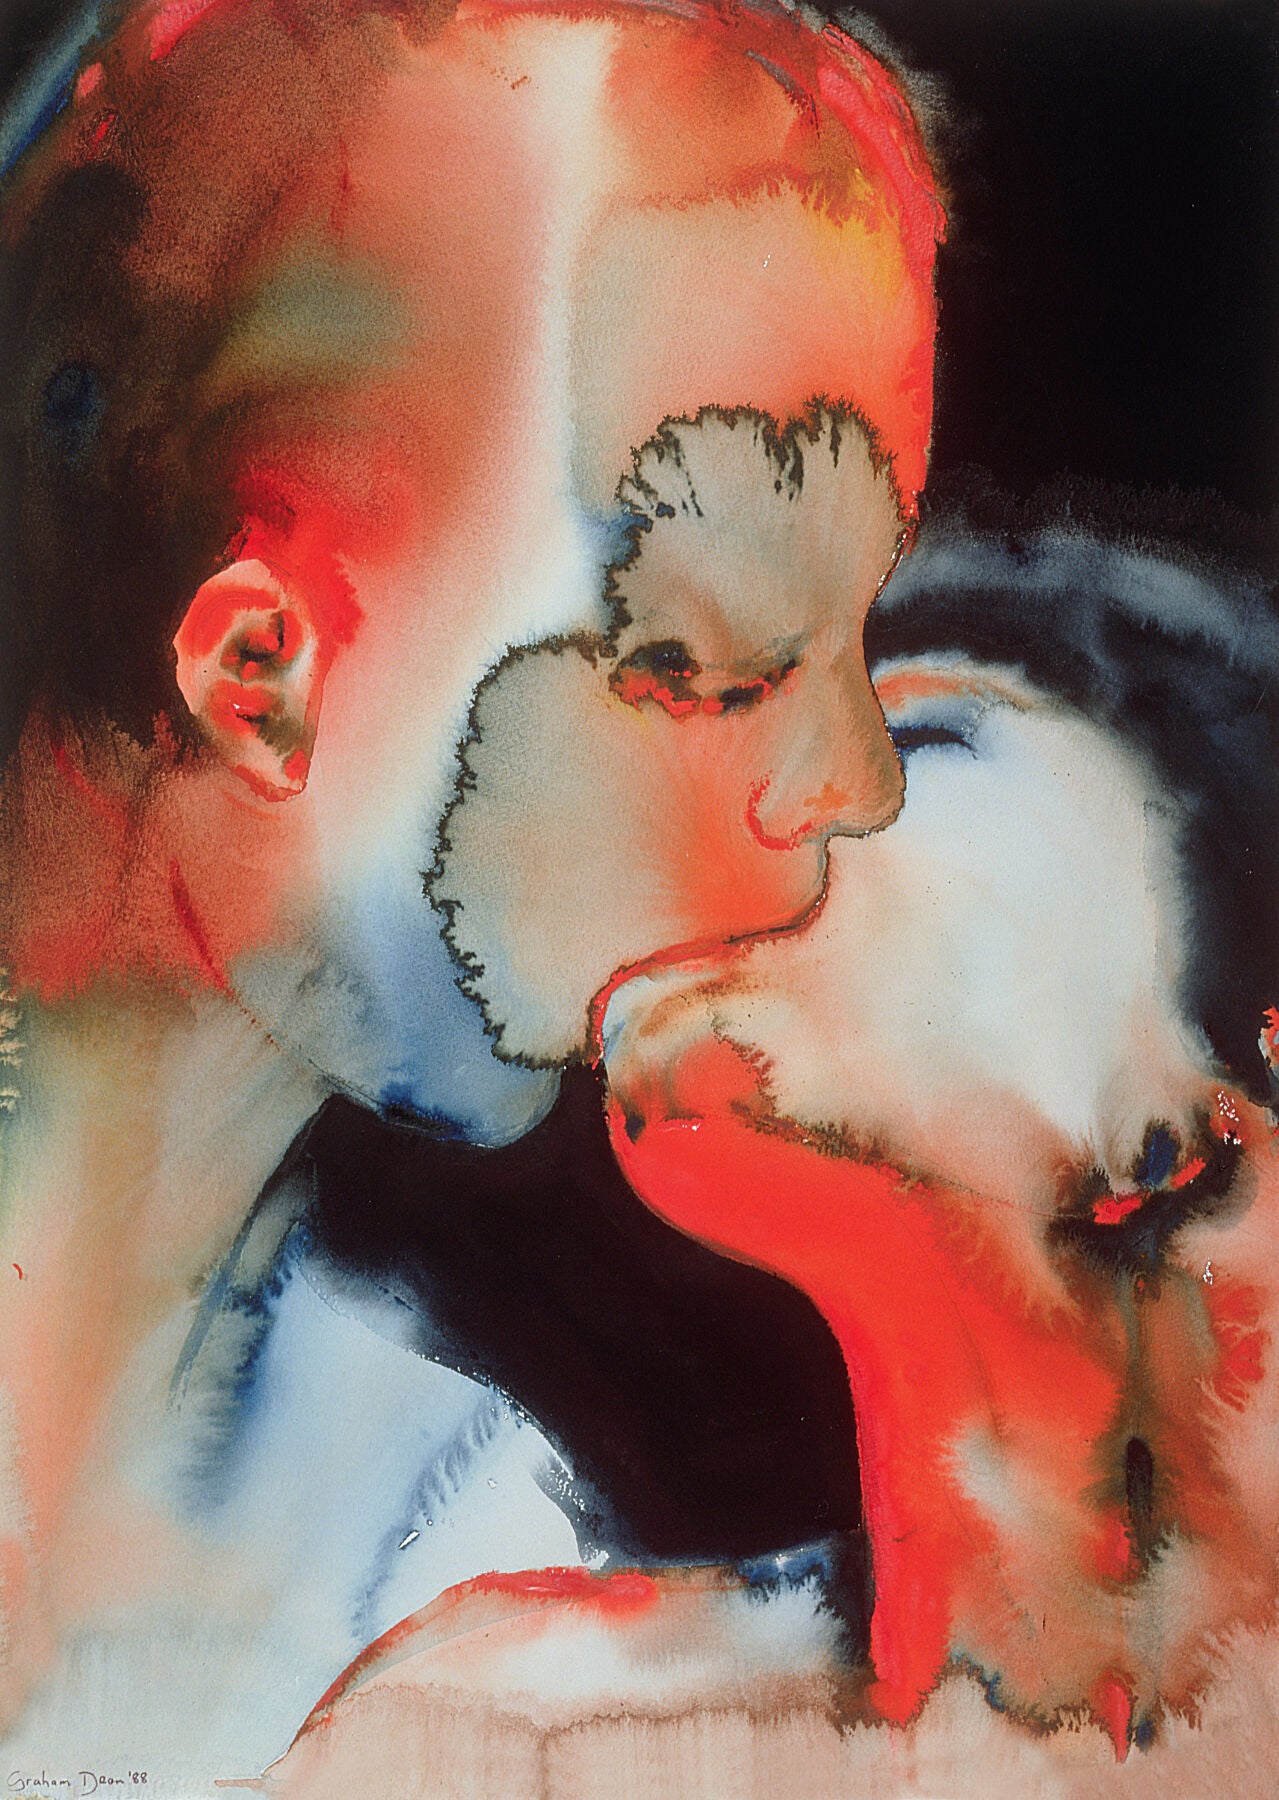 Unframed "Close-up Kiss" by Graham Dean: a mesmerising watercolour turned into an archival print that captures intimate moments between lovers. This evocative piece delves into themes of passion and closeness, rendered with vivid detail and his unique technique "reverse archaeology.